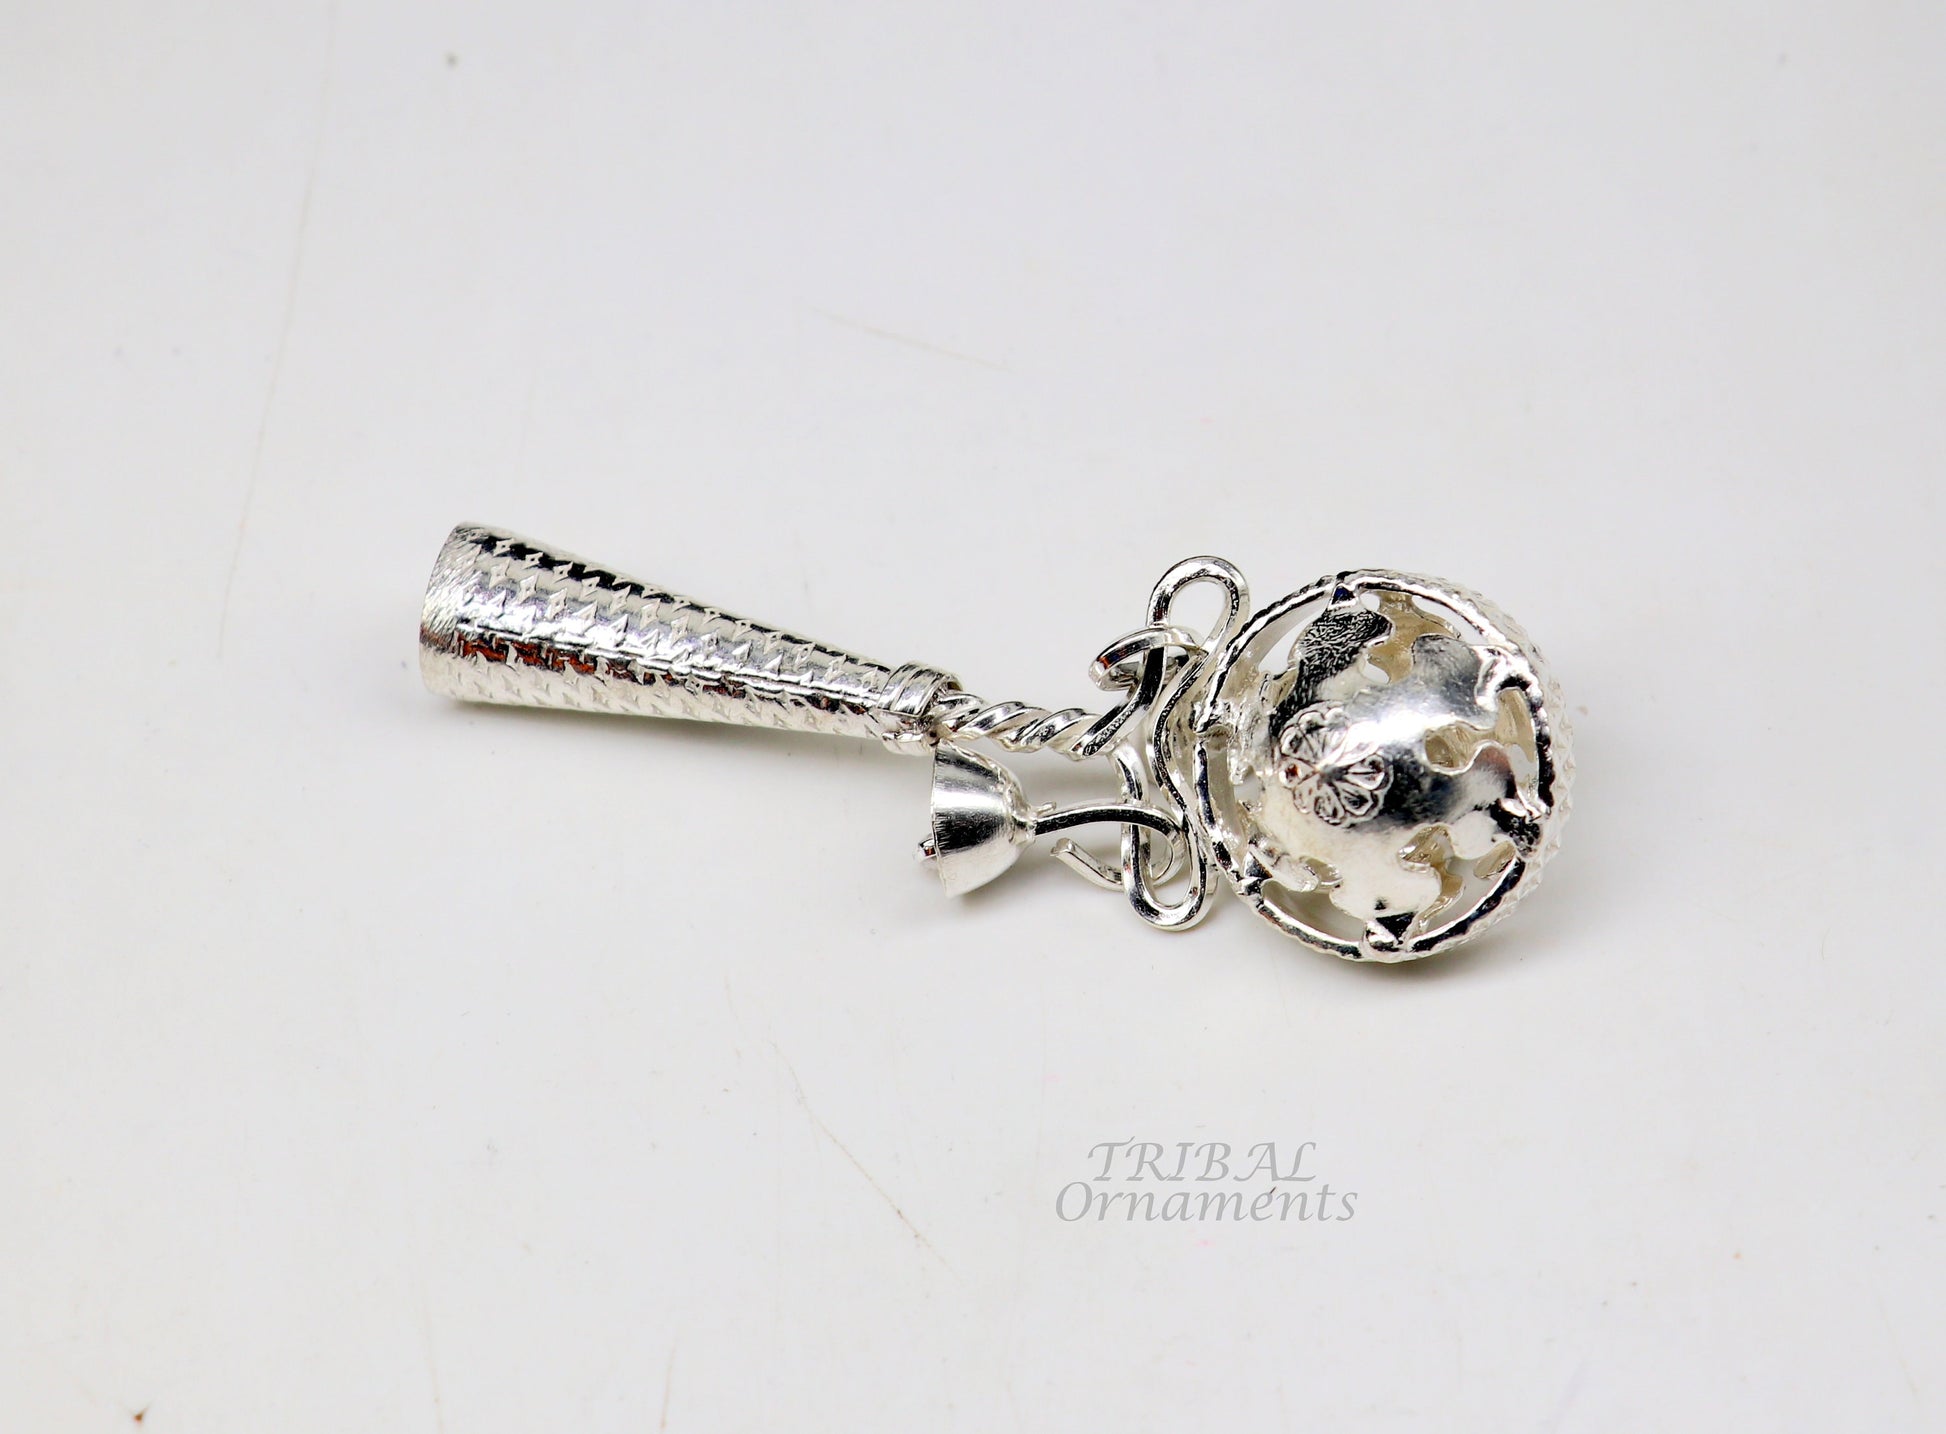 Solid sterling silver handmade design new born baby gifting bells toy, baby krishna gifting toy, silver whistle, silver temple article su899 - TRIBAL ORNAMENTS